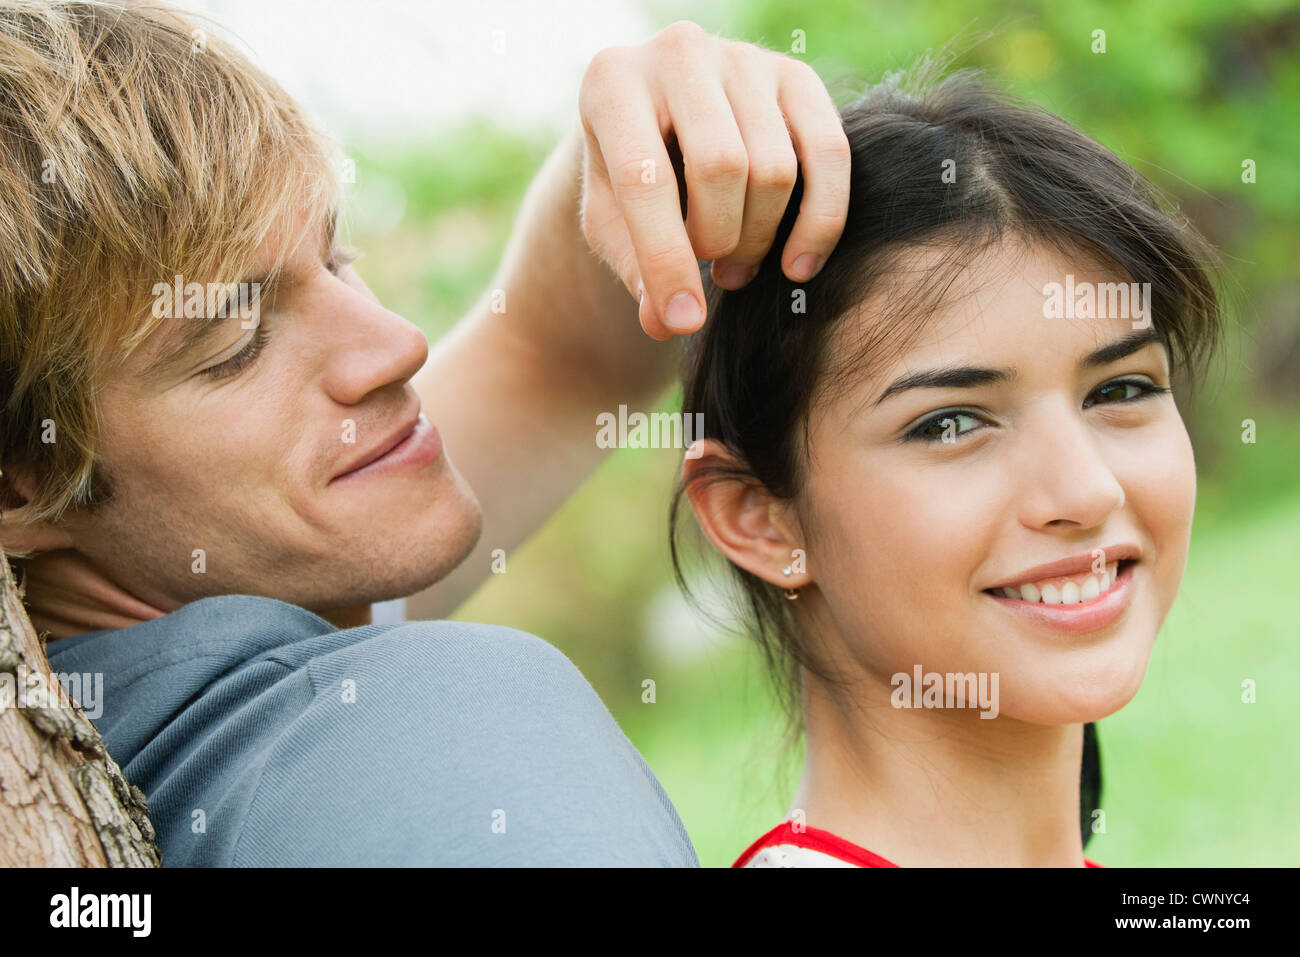 Young couple together outdoors, portrait Stock Photo